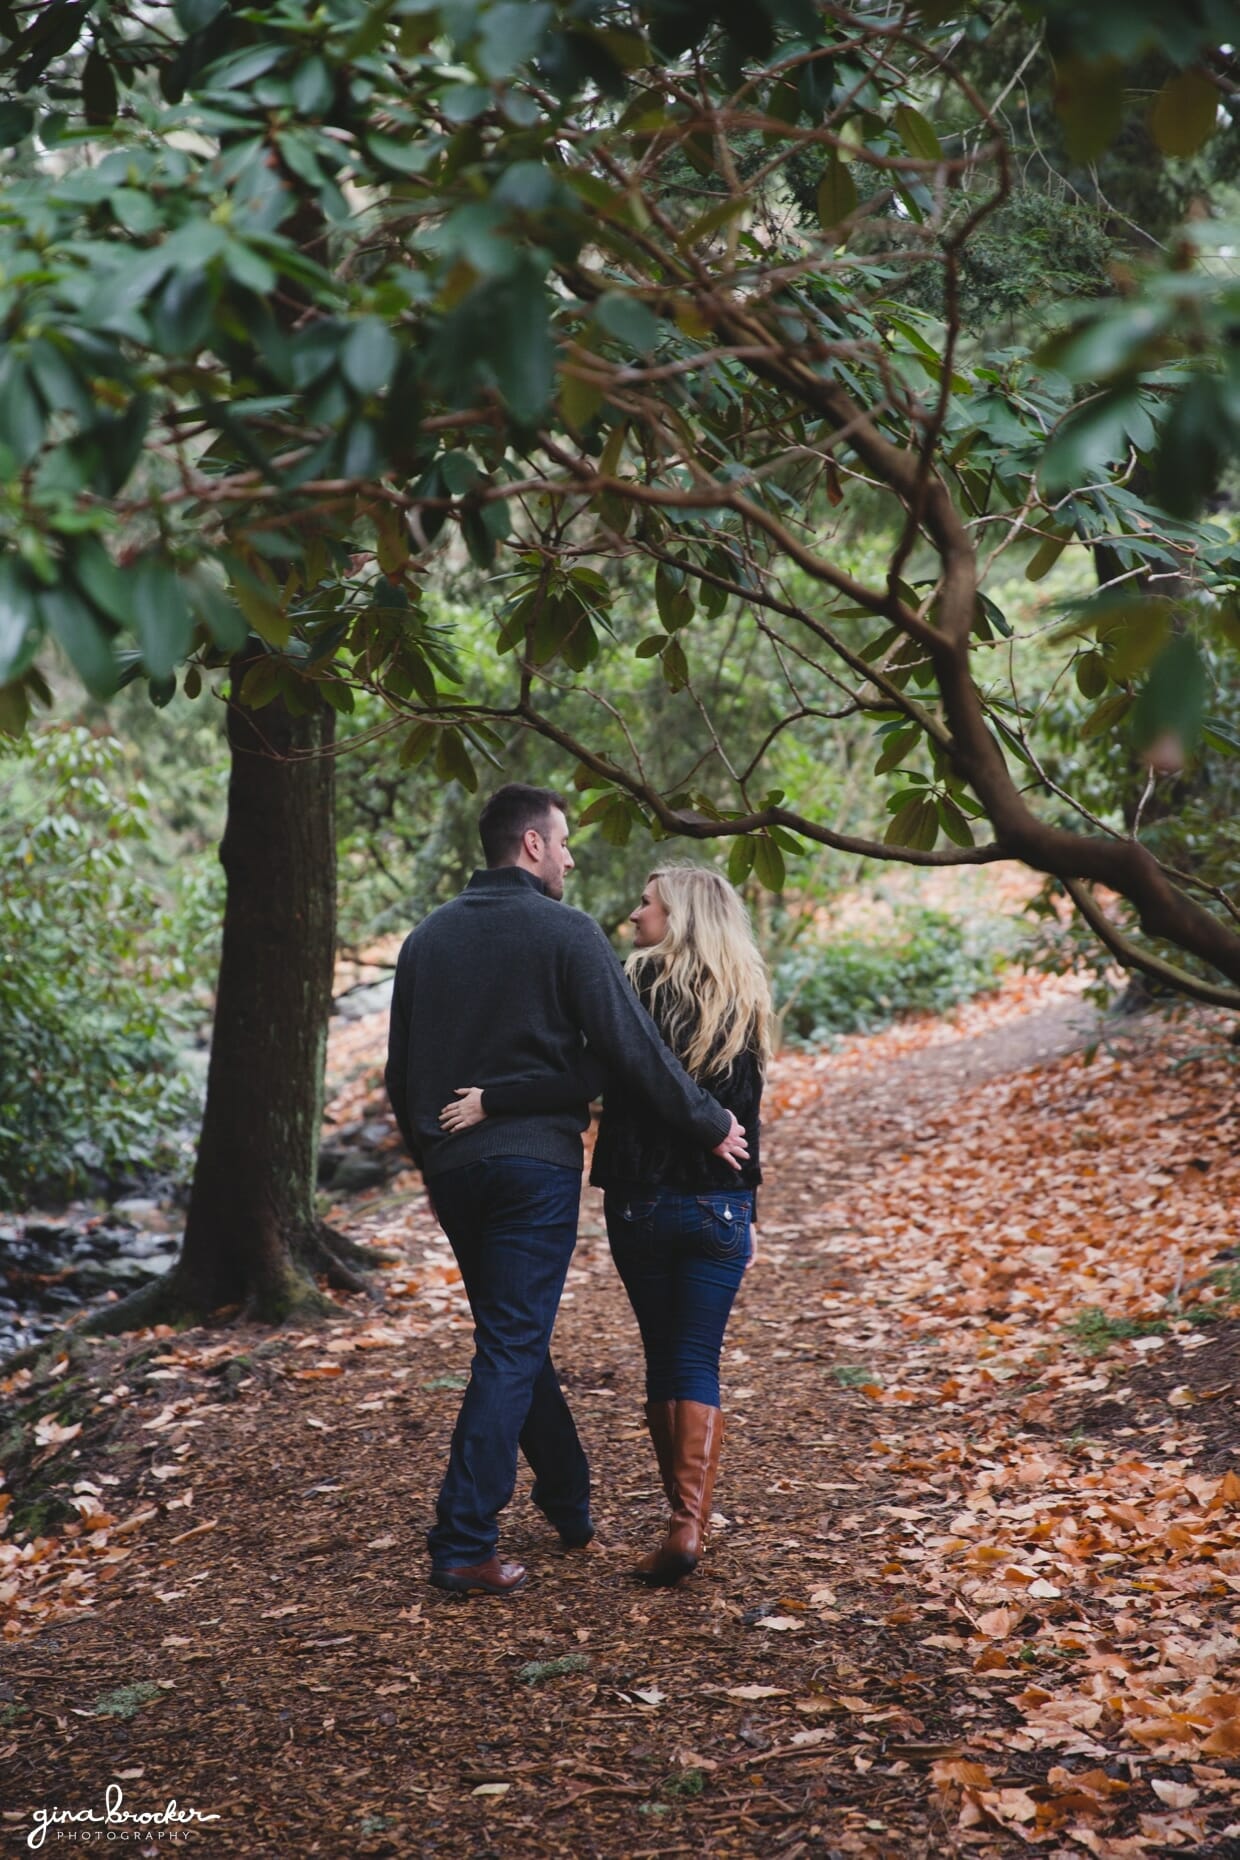 A photograph of a couple through a forest pathway with their arms around each other during their fall couple session in Boston's Arnold Arboretum